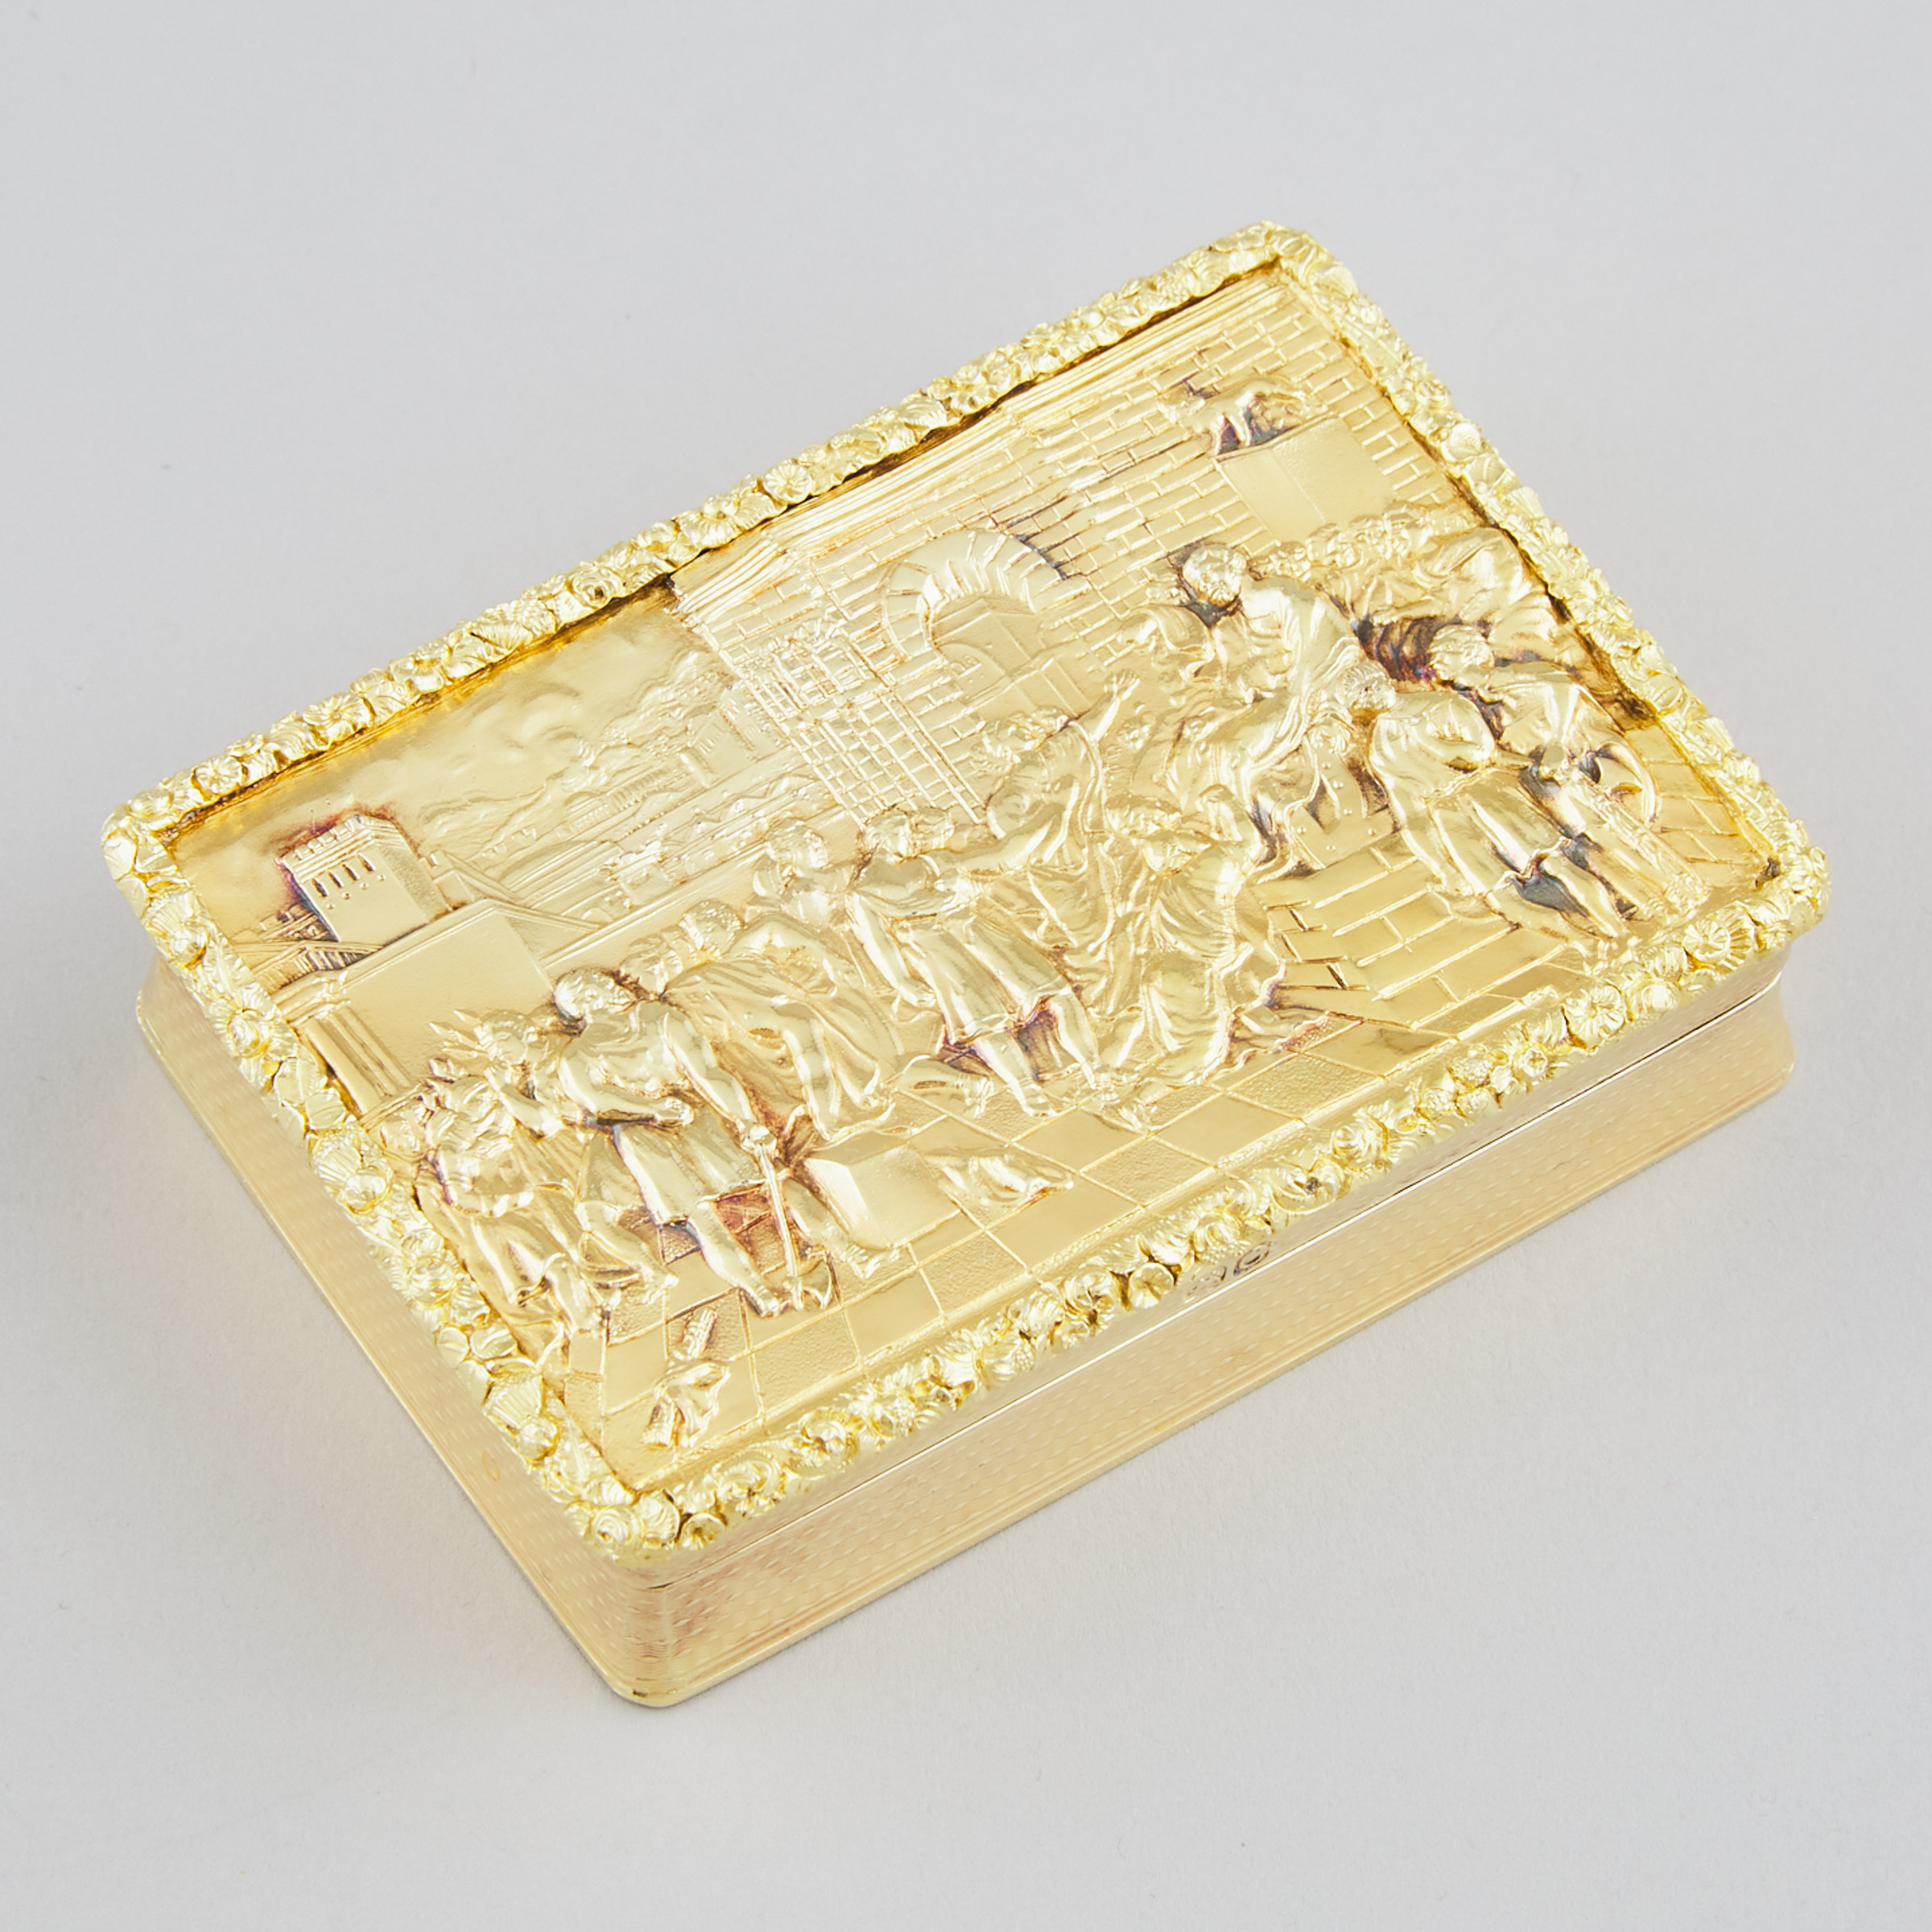 George III Silver-Gilt Rectangular Snuff Box, probably depicting 'Caractacus and his Wife before Claudius', William Snooke Hall, London, 1818